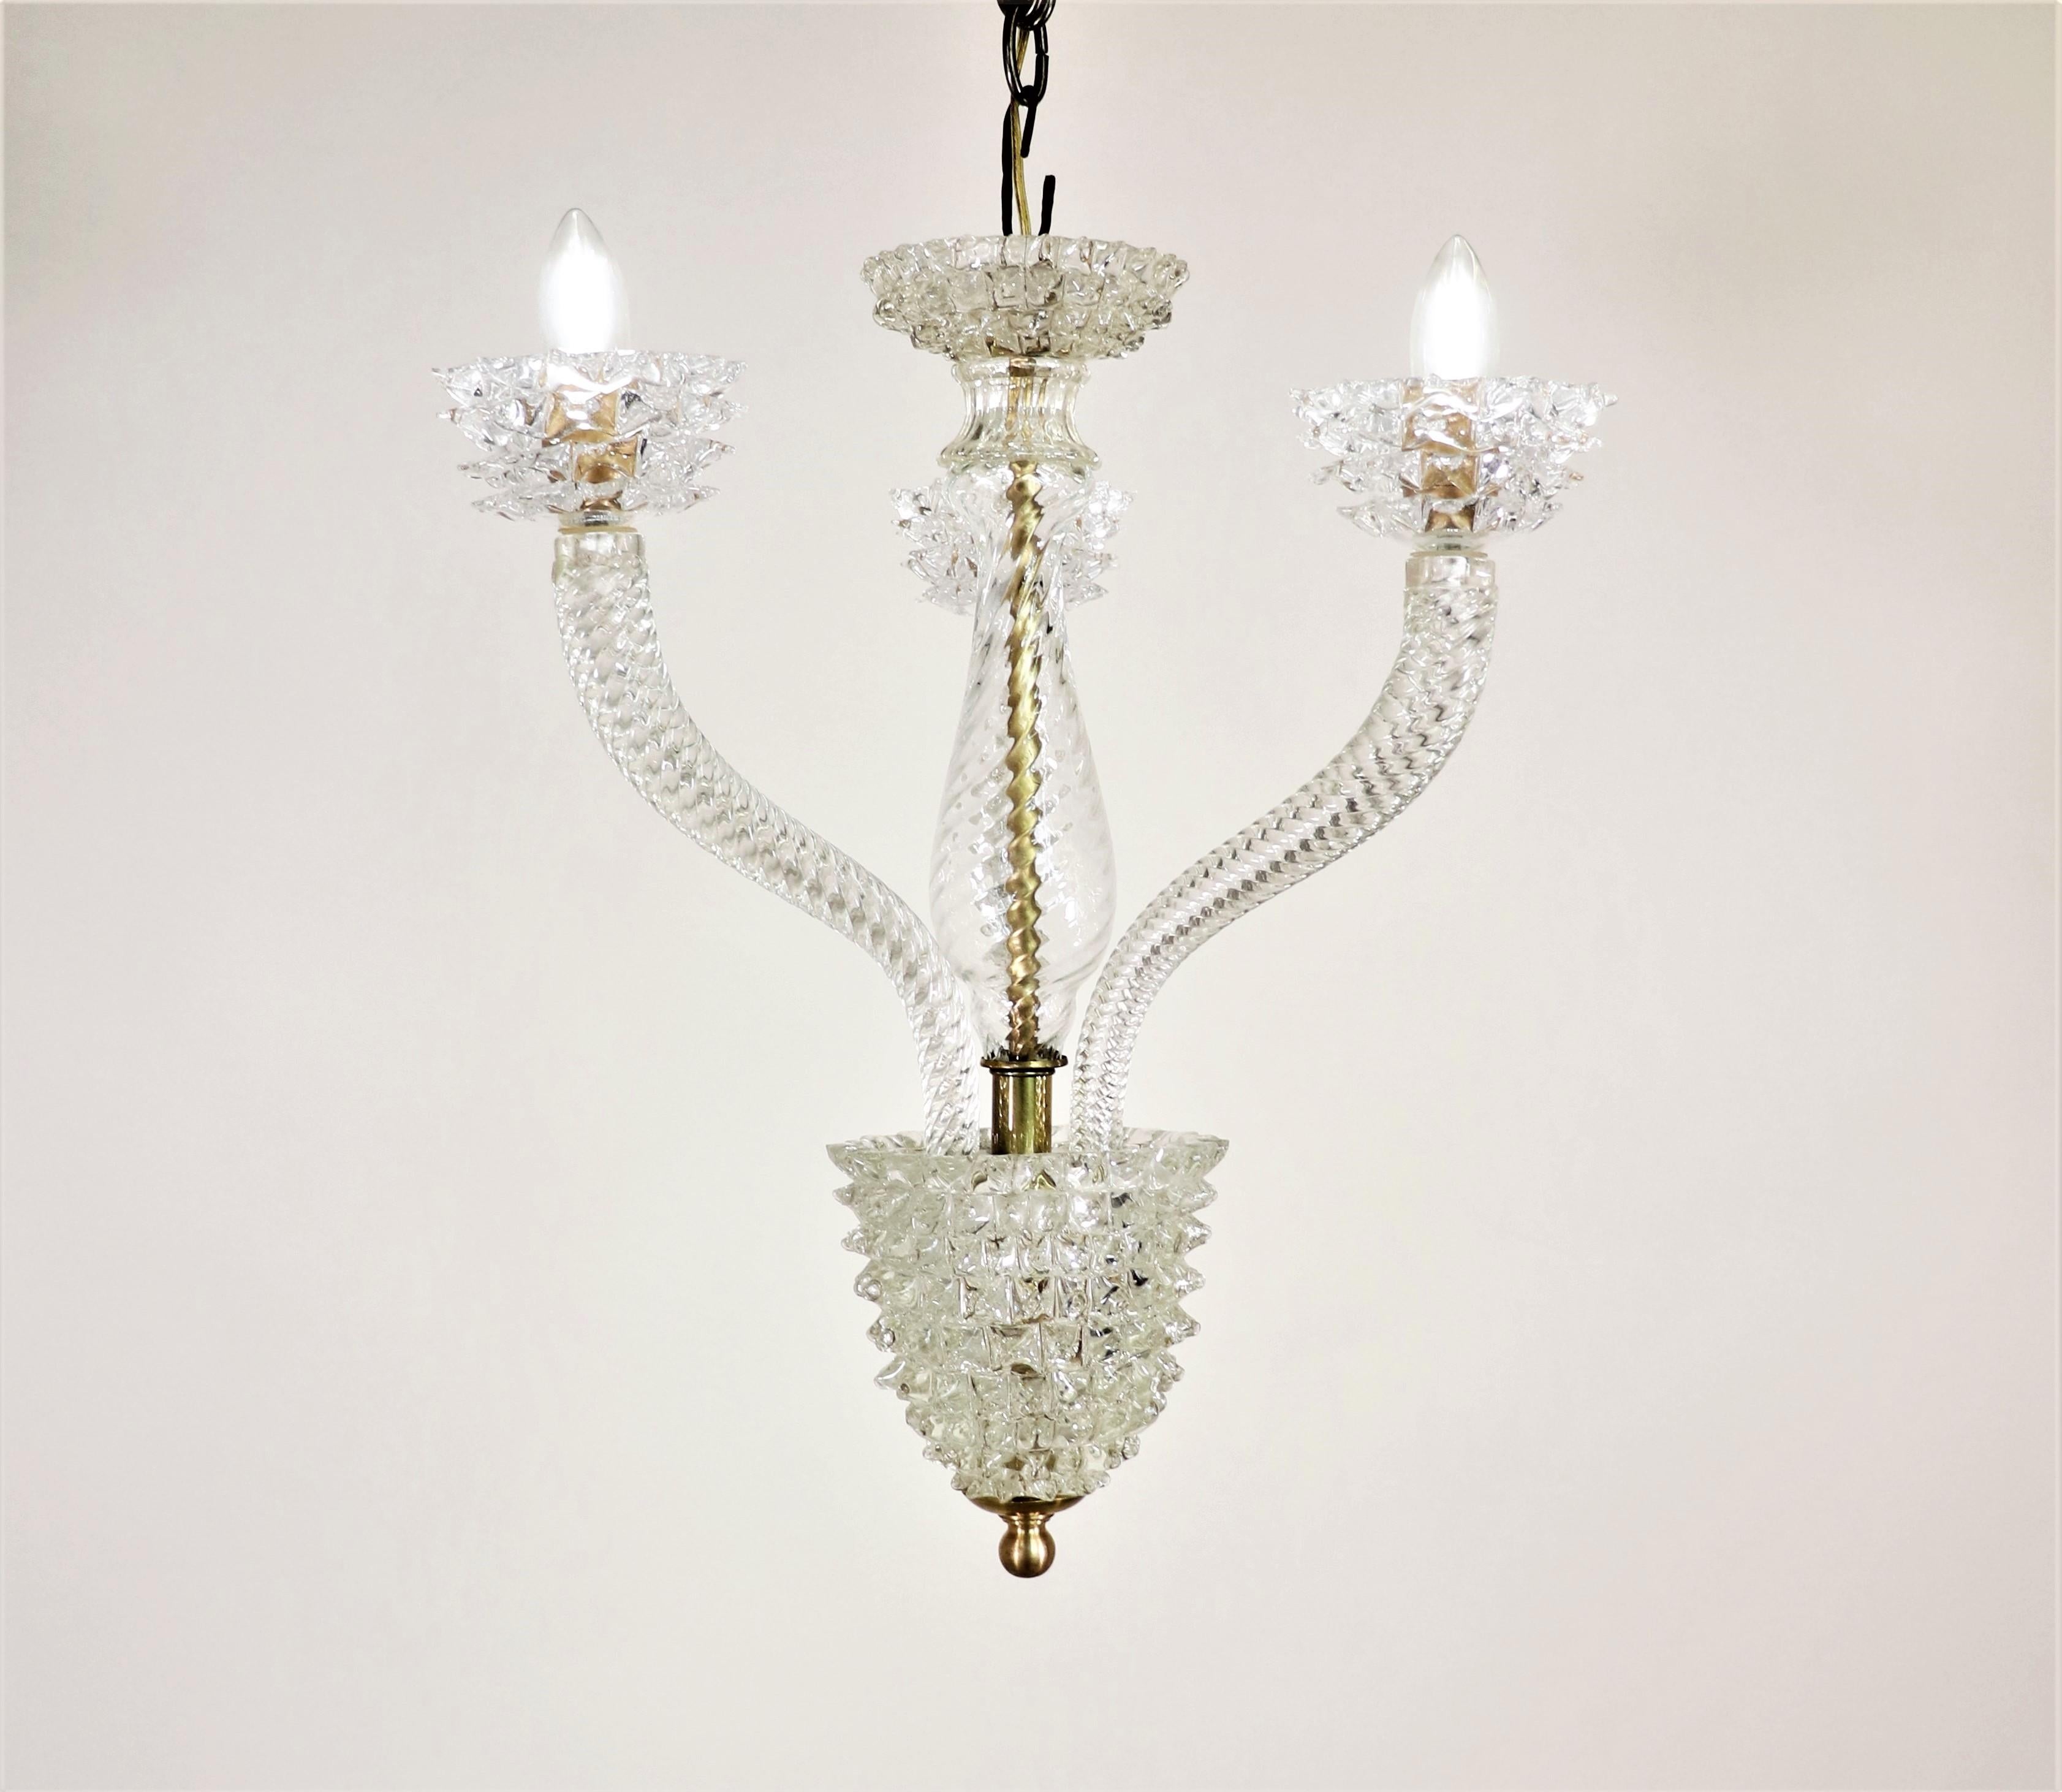 Exceptional Murano glass three-light chandelier in the manner of Ercole Barovier. Founded in 1295, Barovier is a respected name in Italian Murano glass design. In the 1920-1939's, designer Ercole Barovier began a 50-year career as the artistic